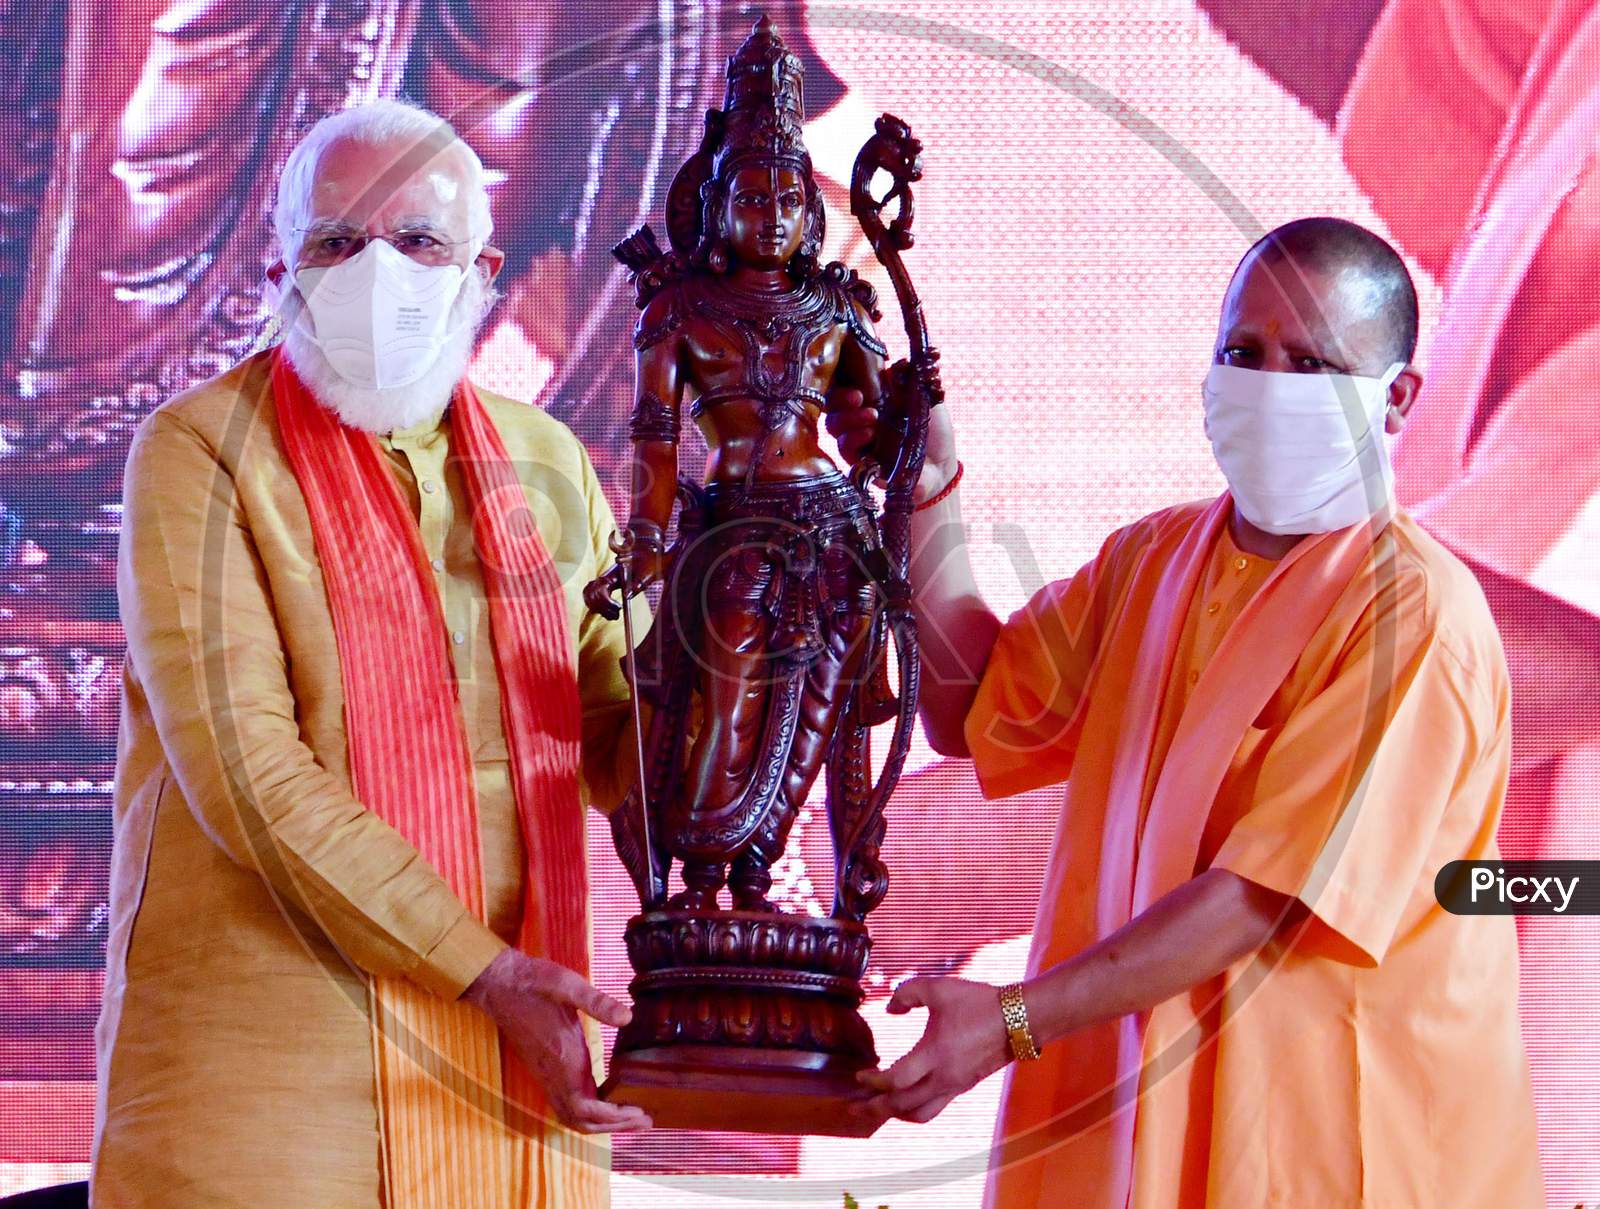 Prime Minister Narendra Modi and Uttar Pradesh Chief Minister Yogi Adityanath hold an idol of Hindu Lord Ram after the foundation laying ceremony for a Ram's temple, in Ayodhya, India, August 5, 2020.